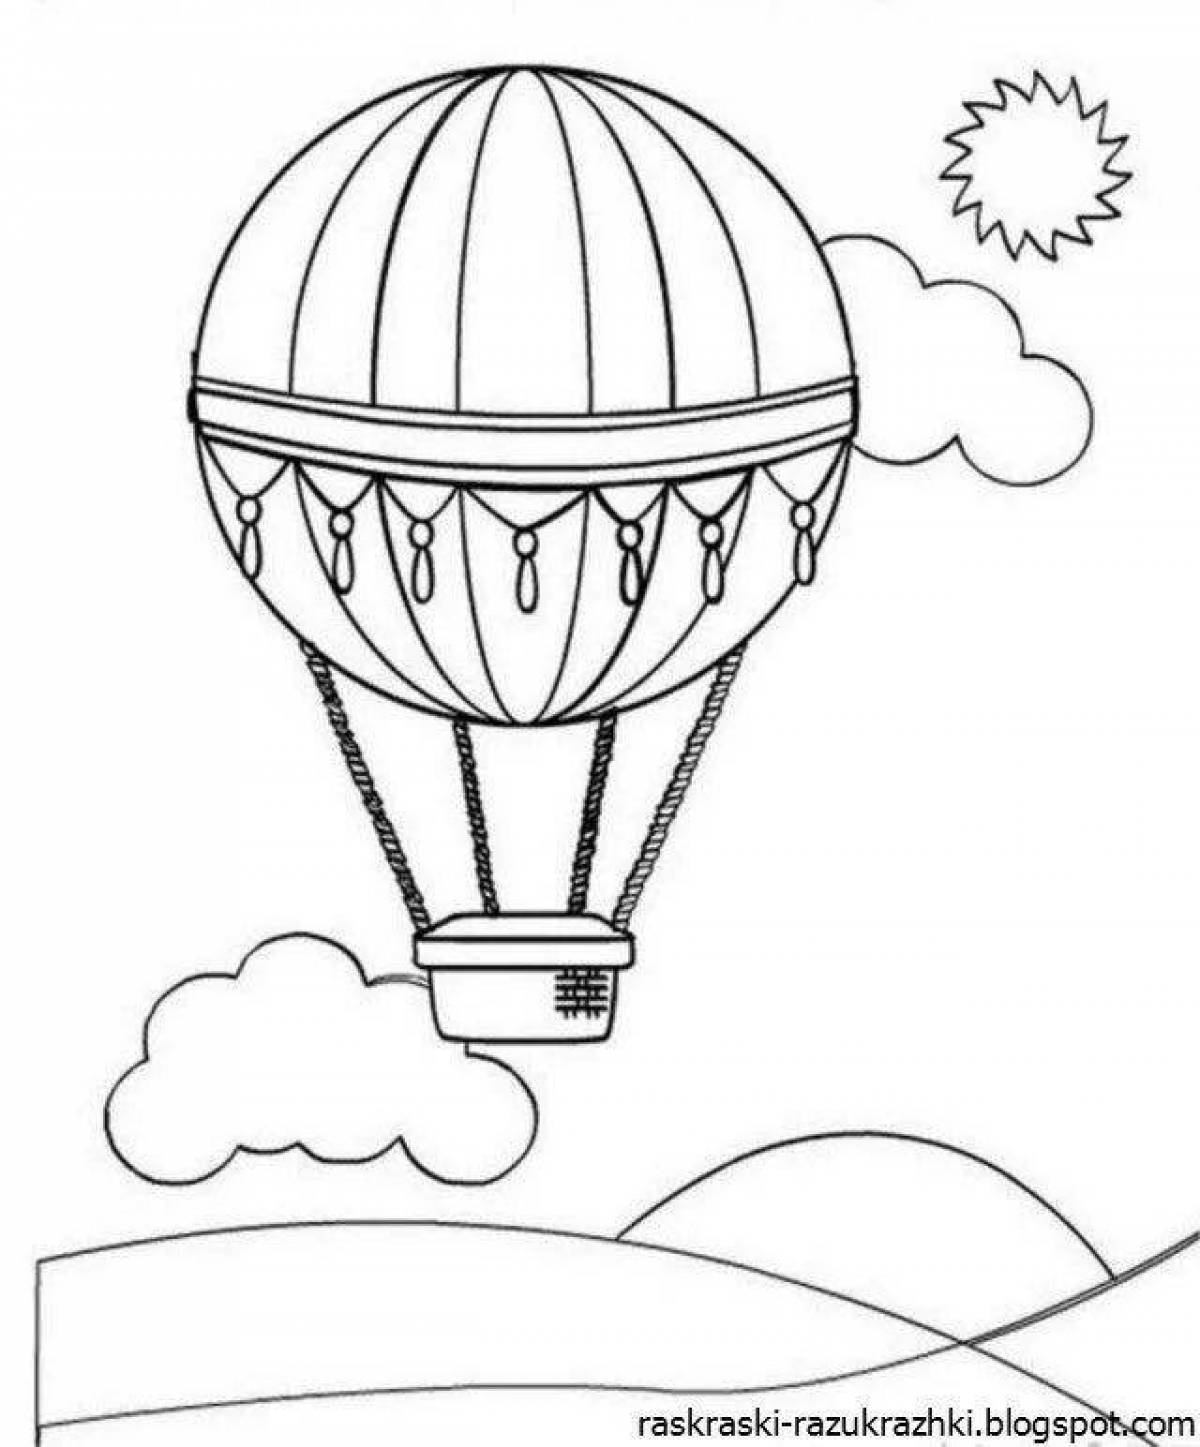 Playful coloring page with balloons for kids